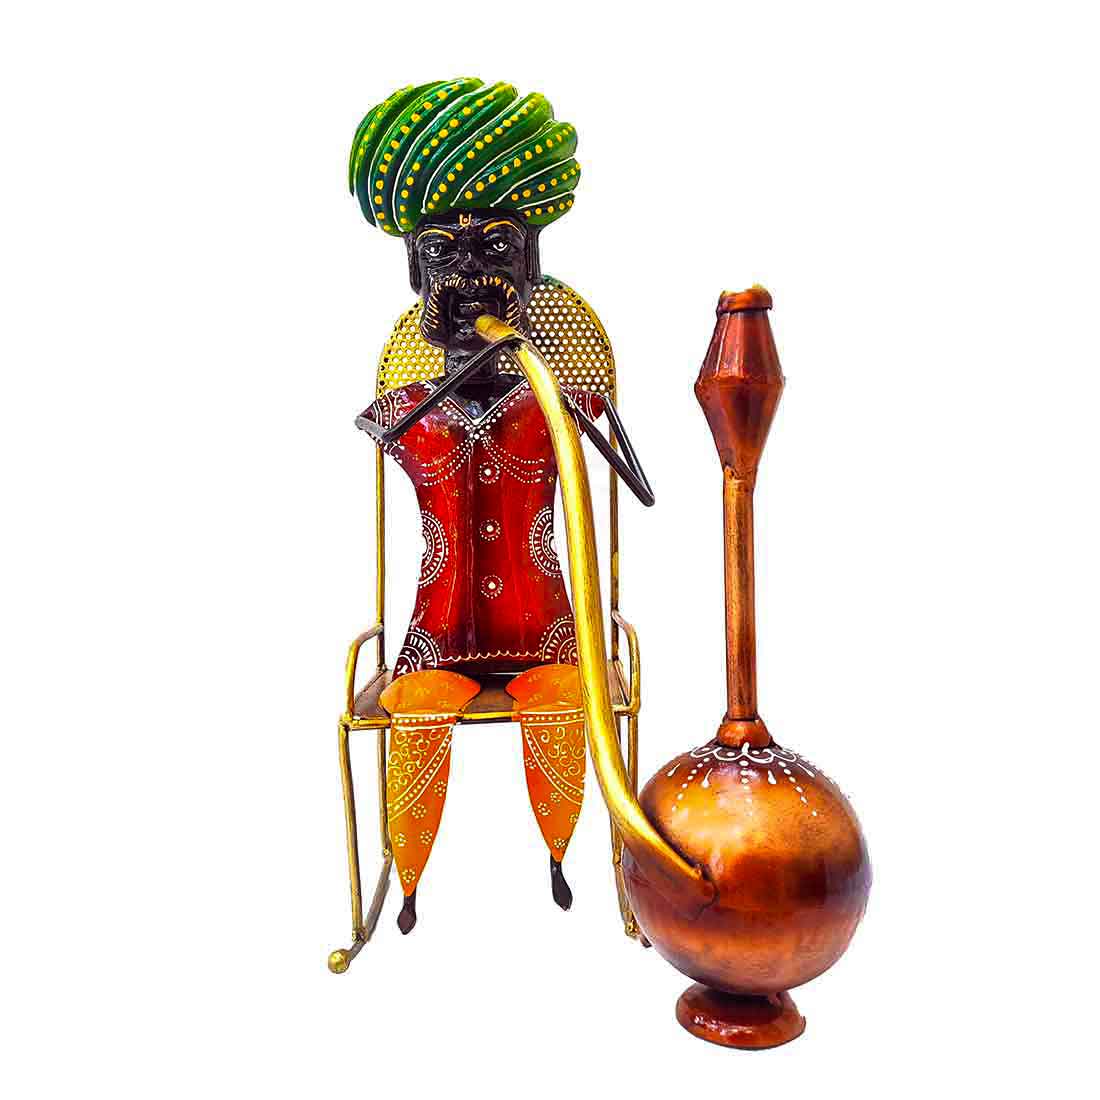 Man with Hukka - Antique Showpiece - For Table Decor & Gifts -17 Inch - ApkaMart